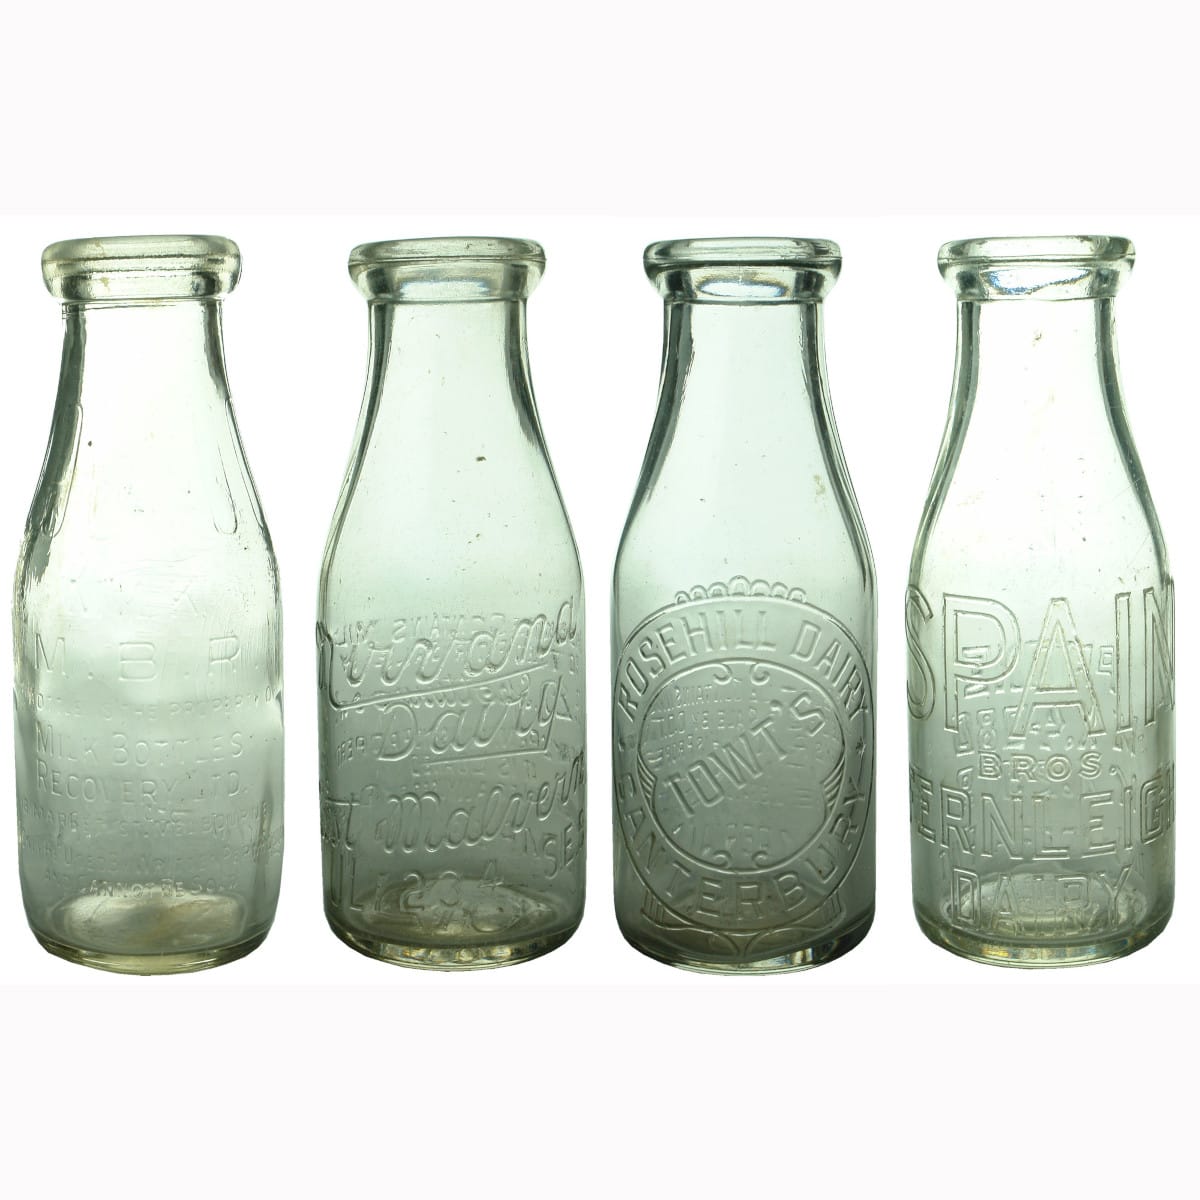 Four Pint wide mouth Milk Bottles: MBR, Nirvana Dairy, Rosehill Dairy and Fernleigh Dairy.